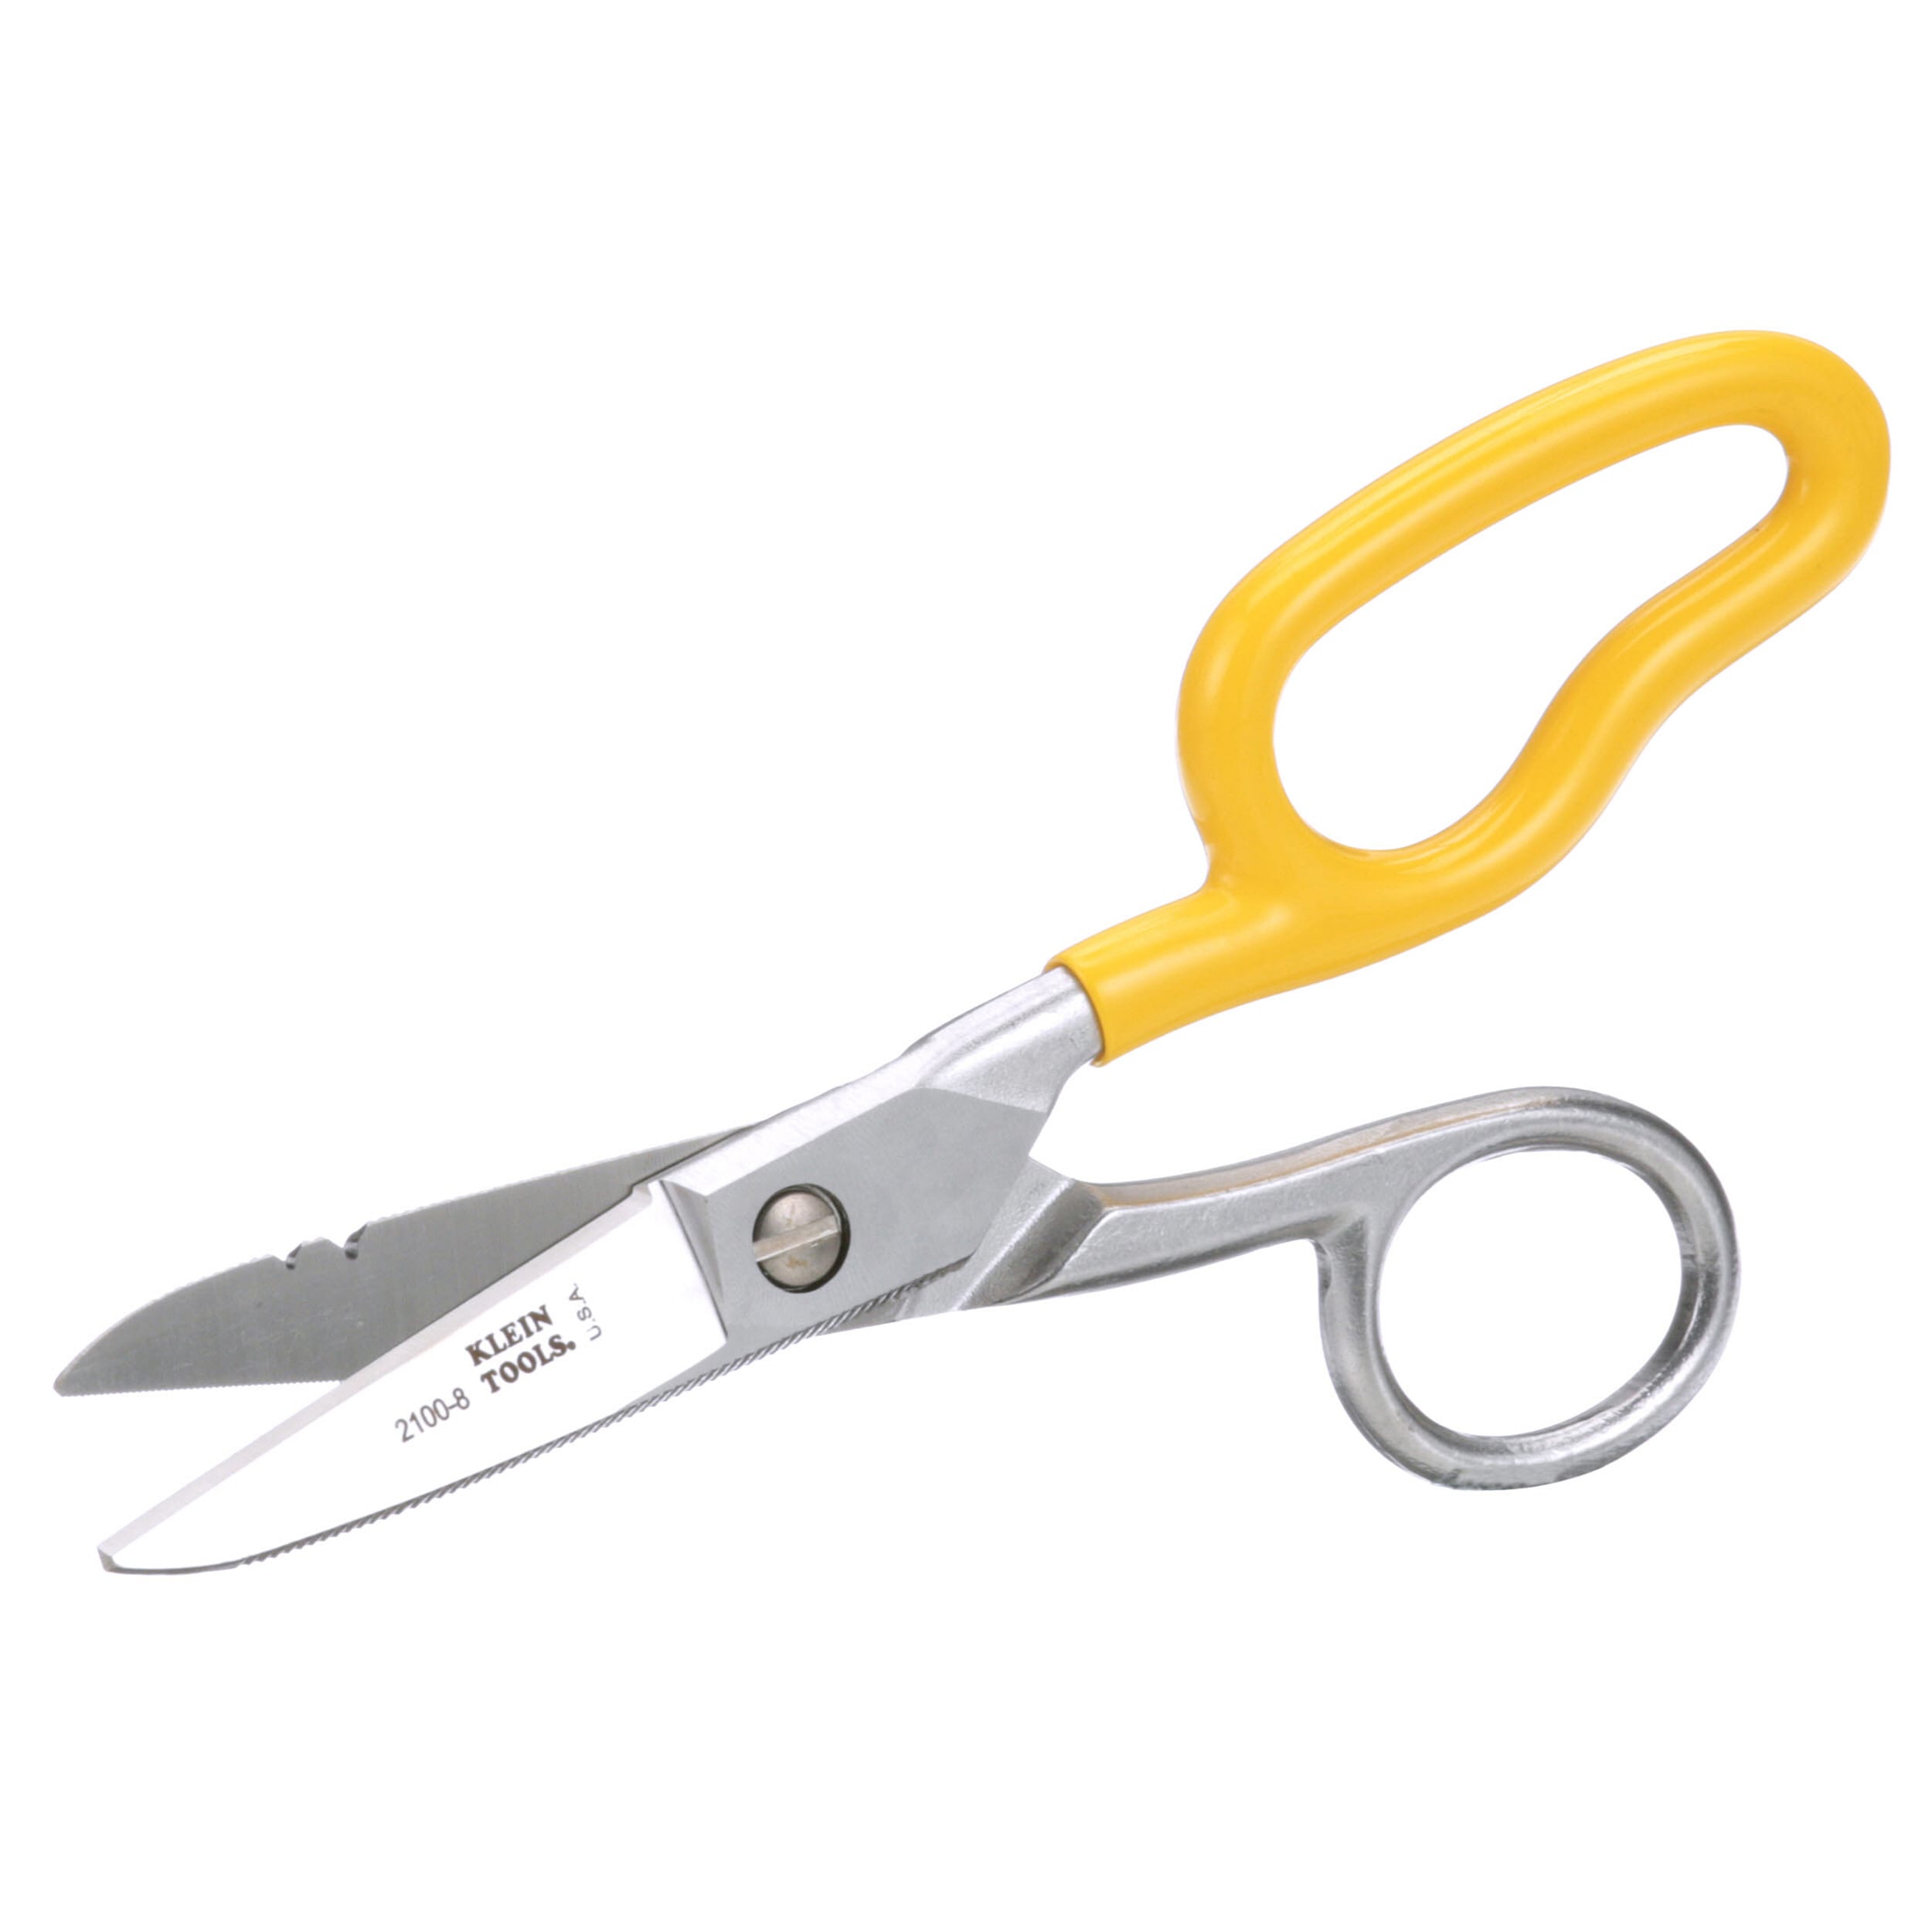 Klein Tools 2100-8 - Free-Fall Snip Stainless Steel